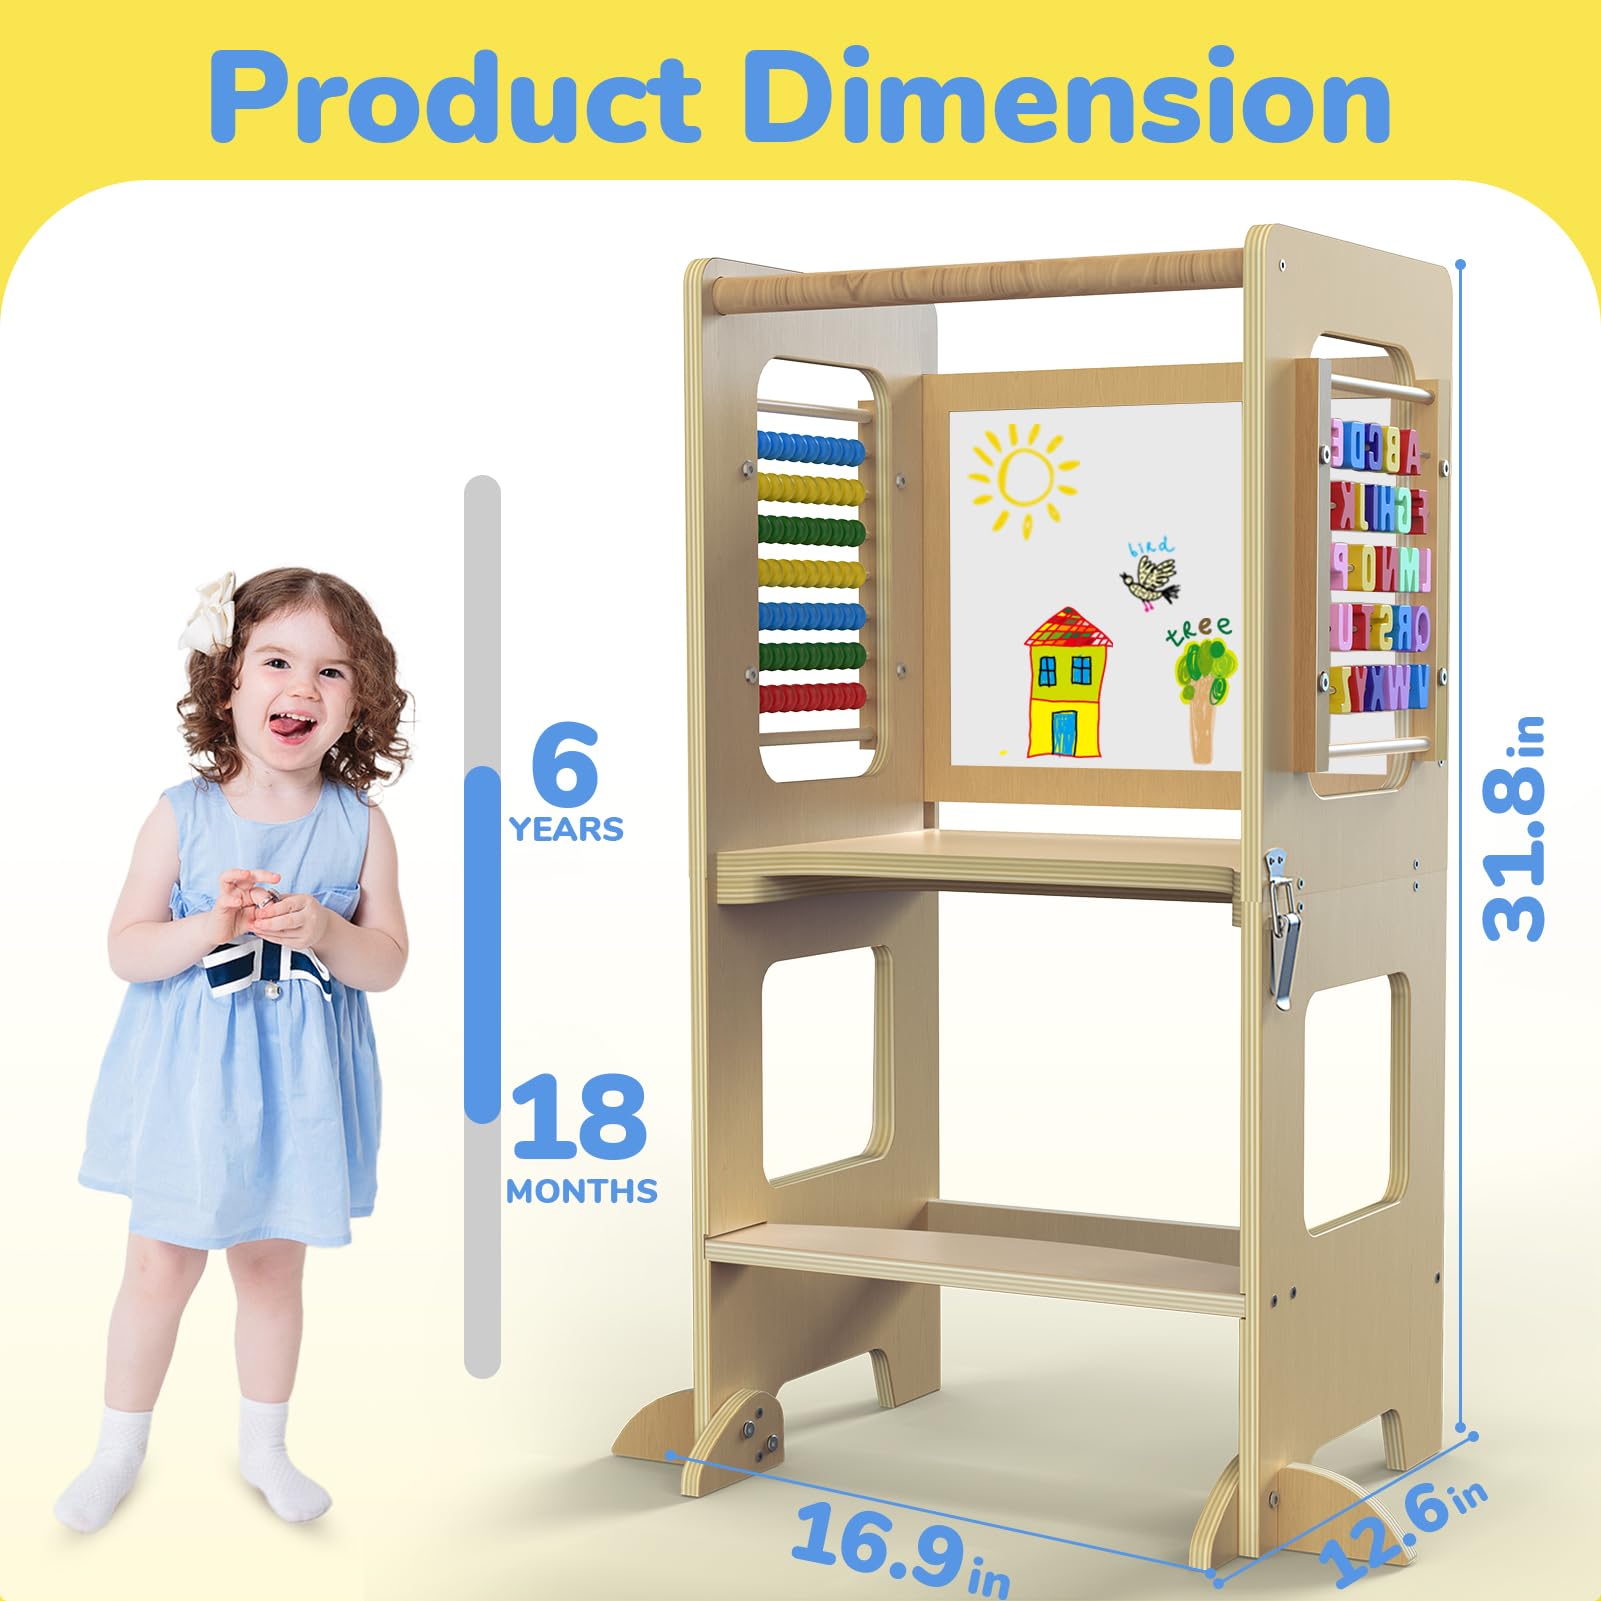 Toddler Kitchen Stool Helper, Toddler Tower, Foldable Weaning Table with Chalkboard and Plaything, Montessori Kids Foldable Step Stool and Kids Learning Standing Tower for Bathroom and Counter